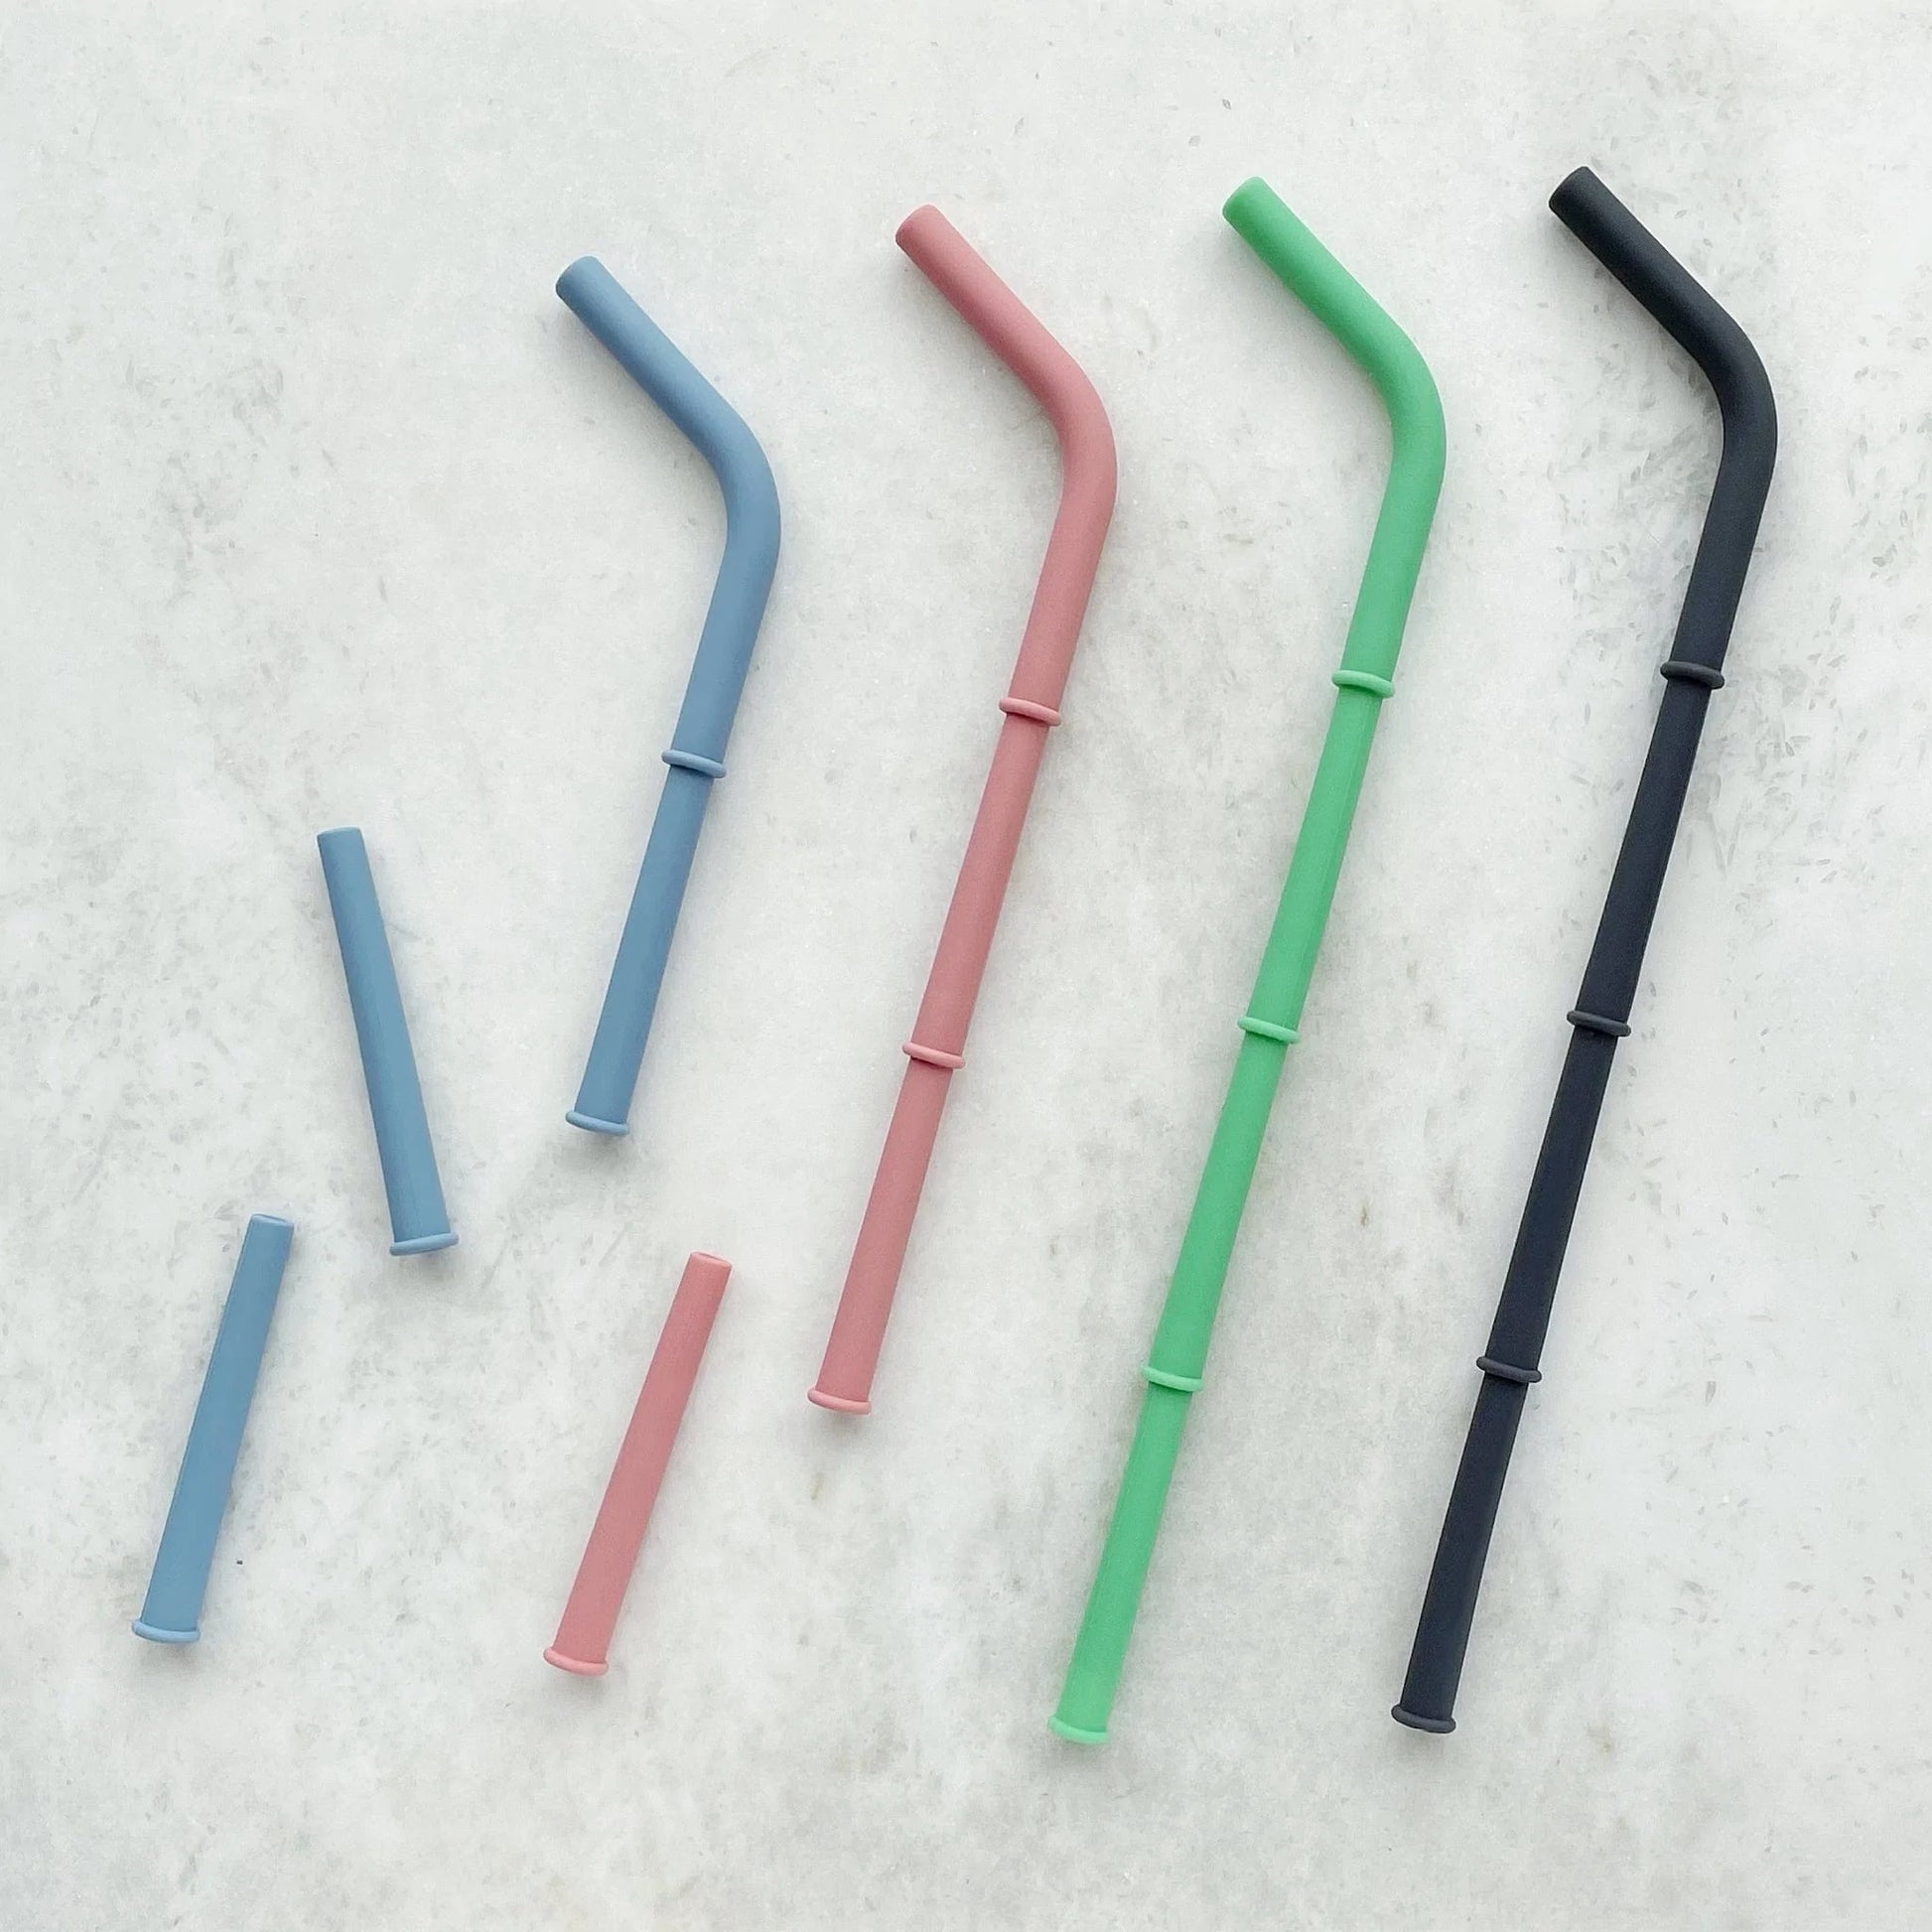 Big Bee, Little Bee Build-A-Straw Reusable Silicone Straws (Extra Wide Size)